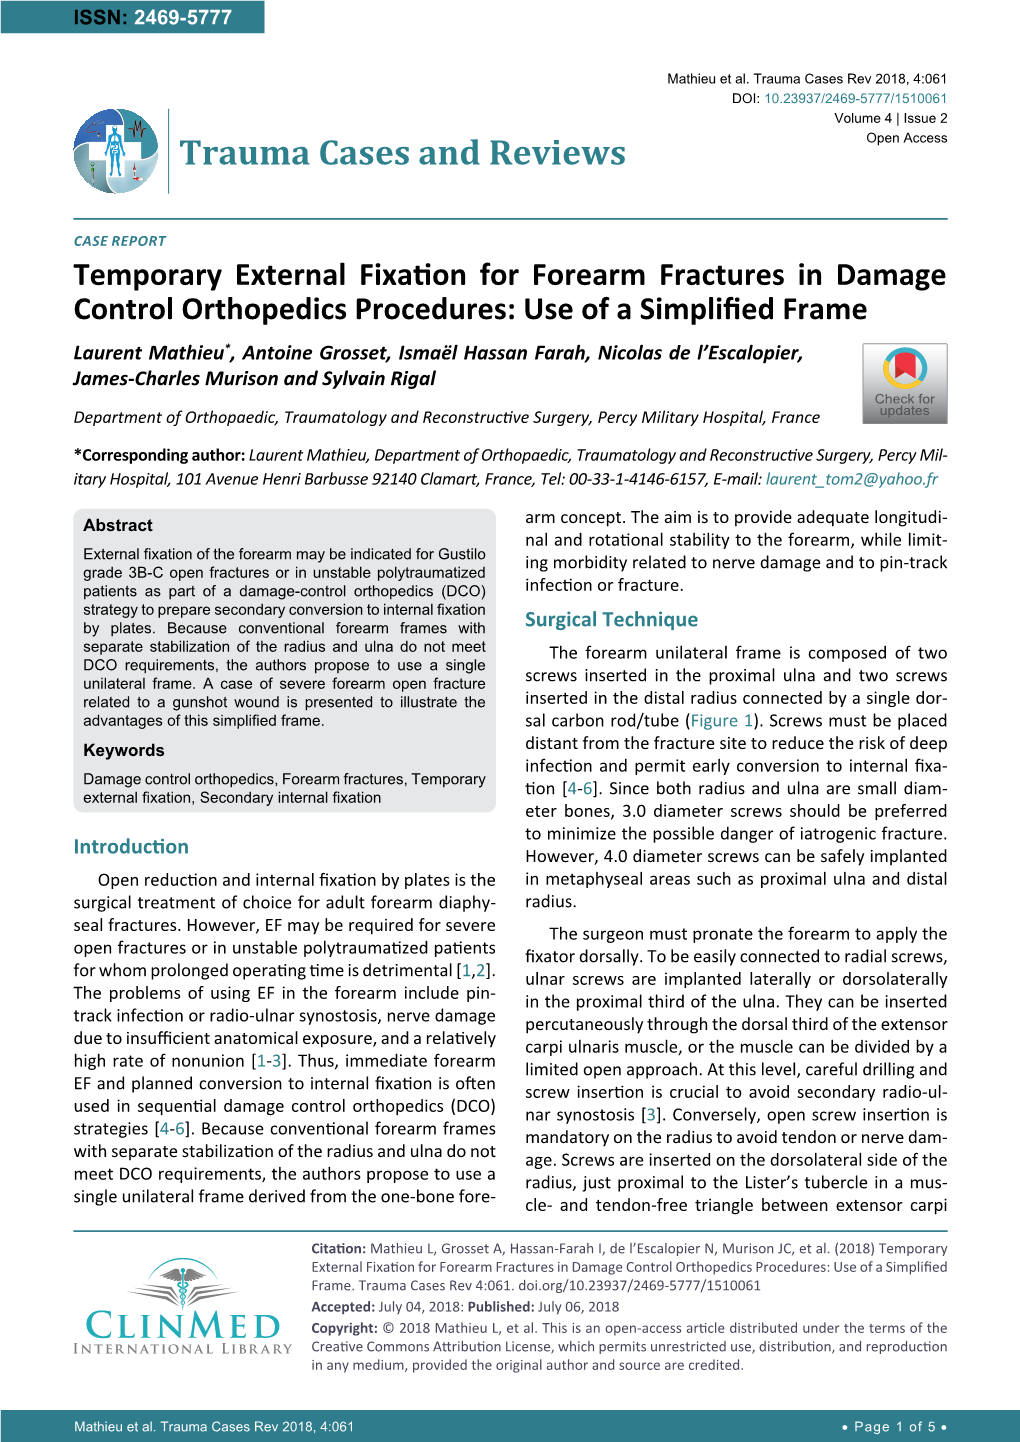 Temporary External Fixation for Forearm Fractures in Damage